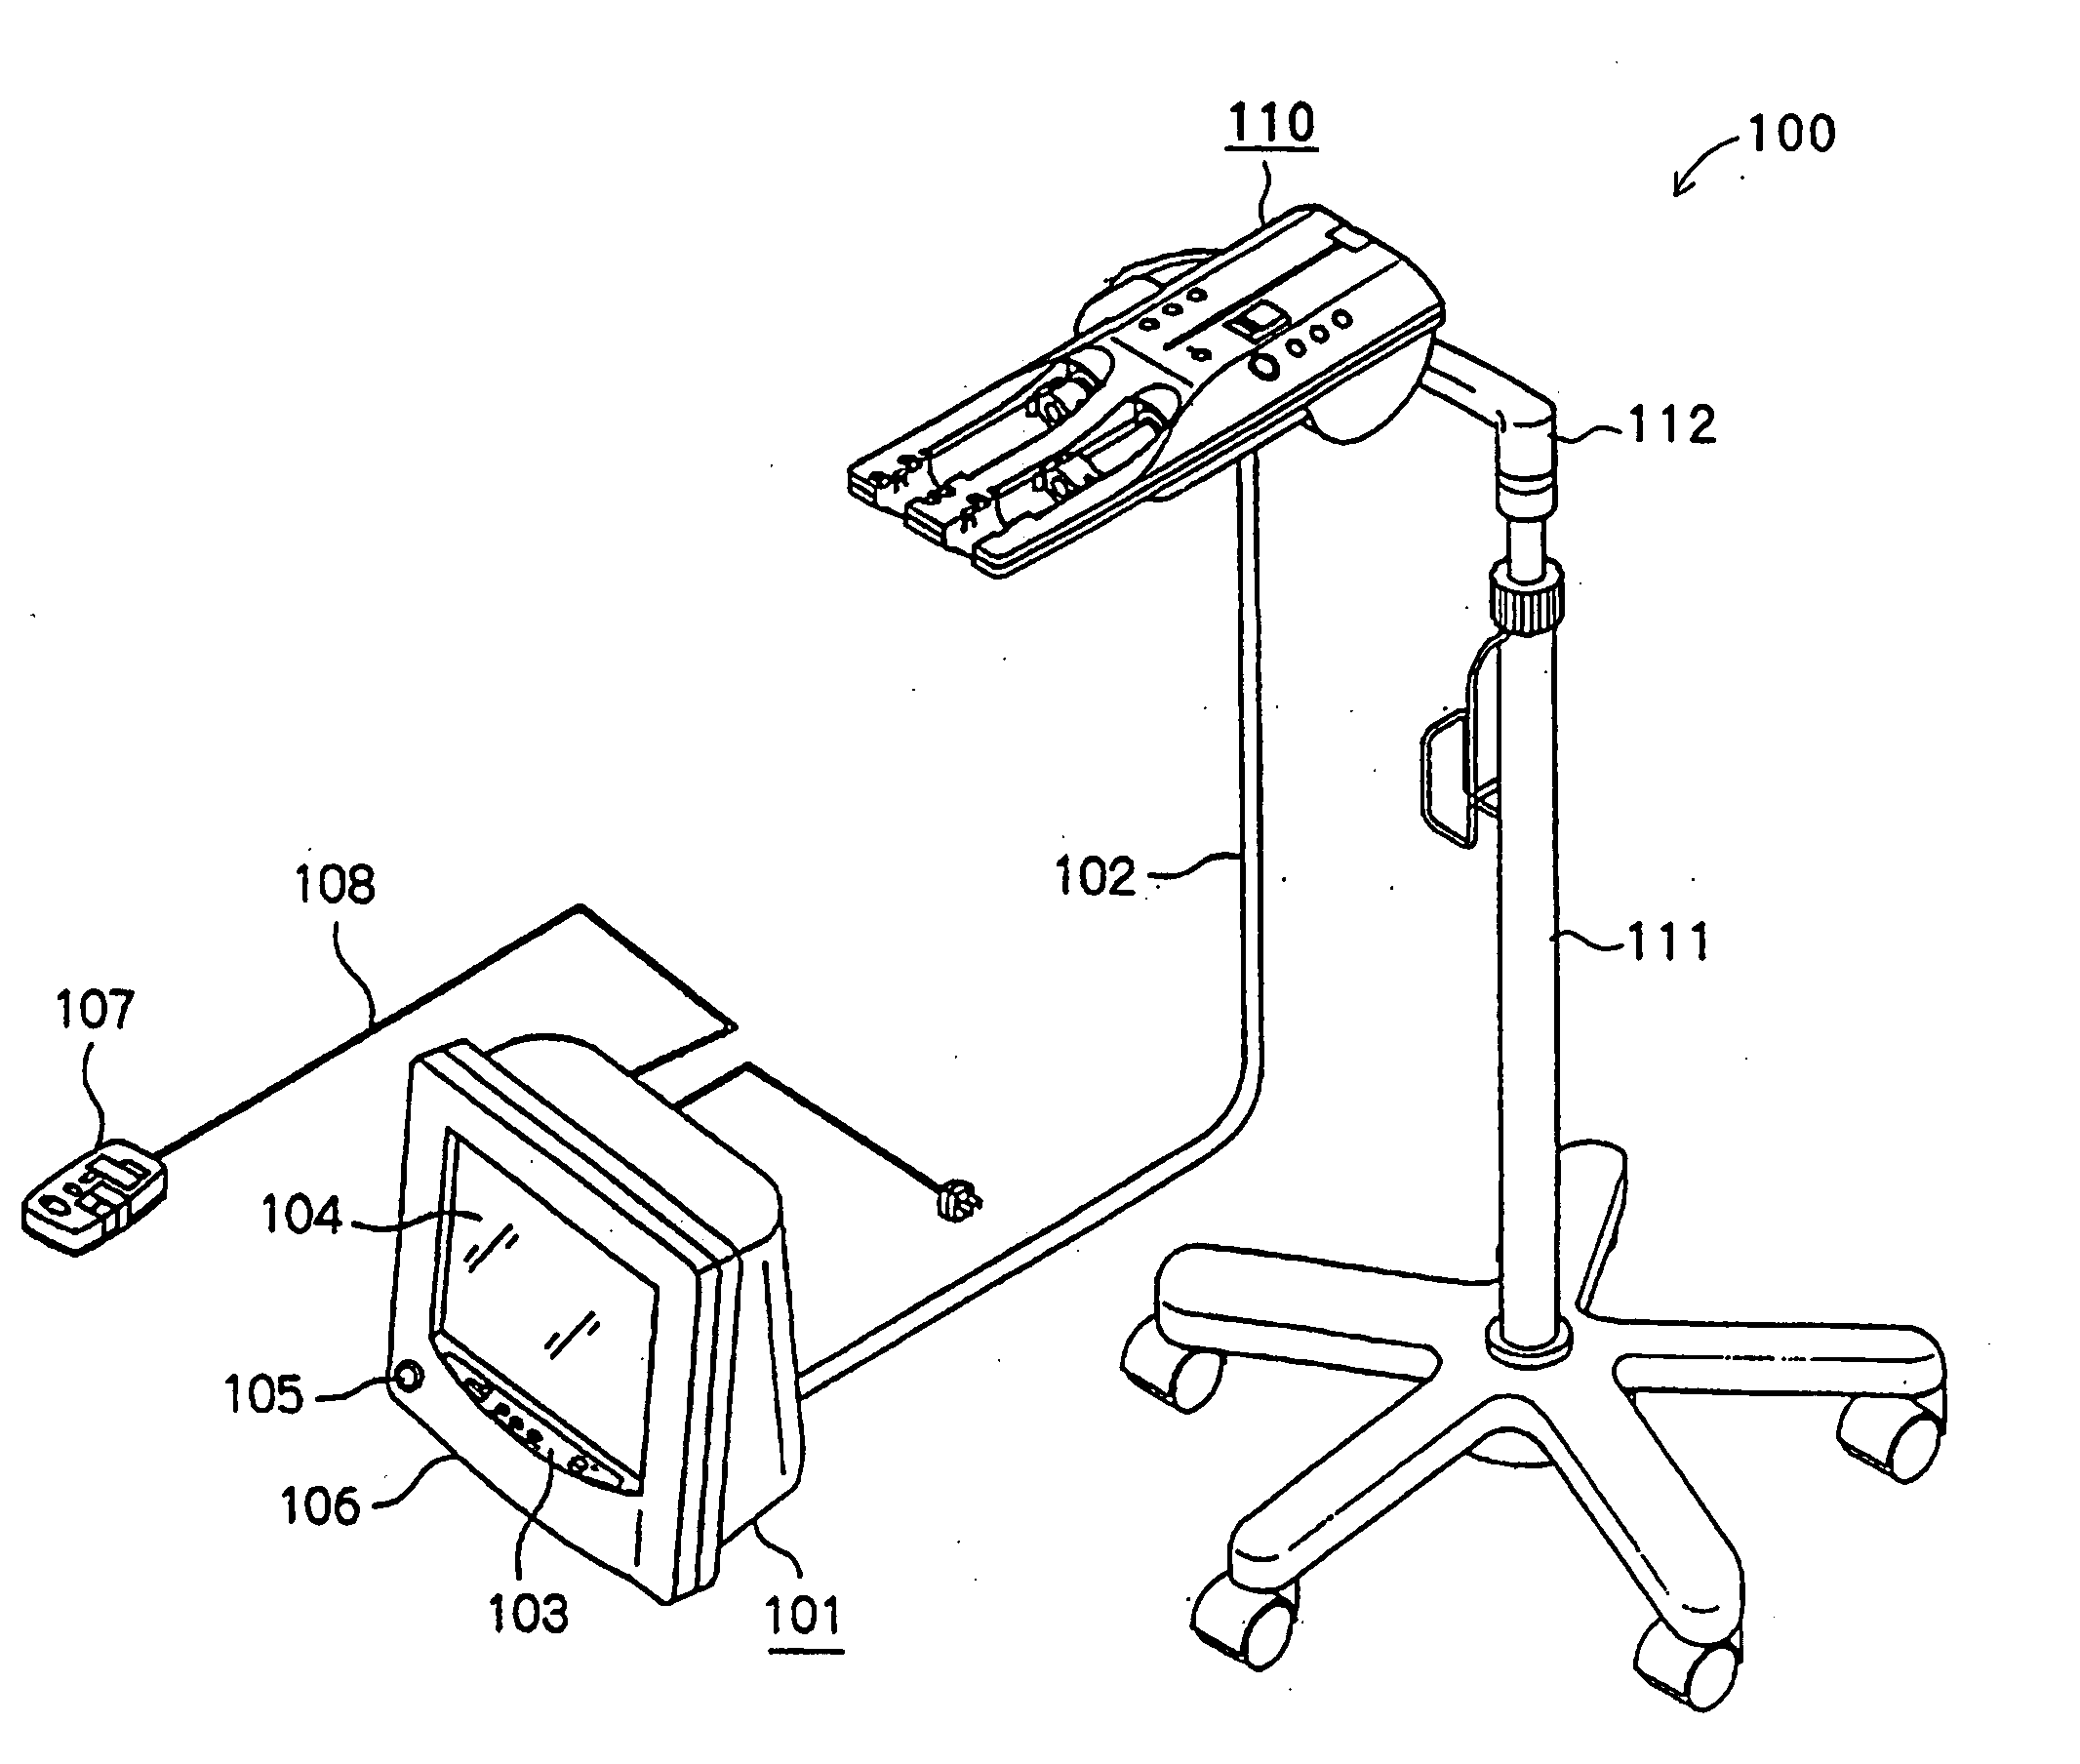 Medicine infuser for displaying image of entered infusion condition